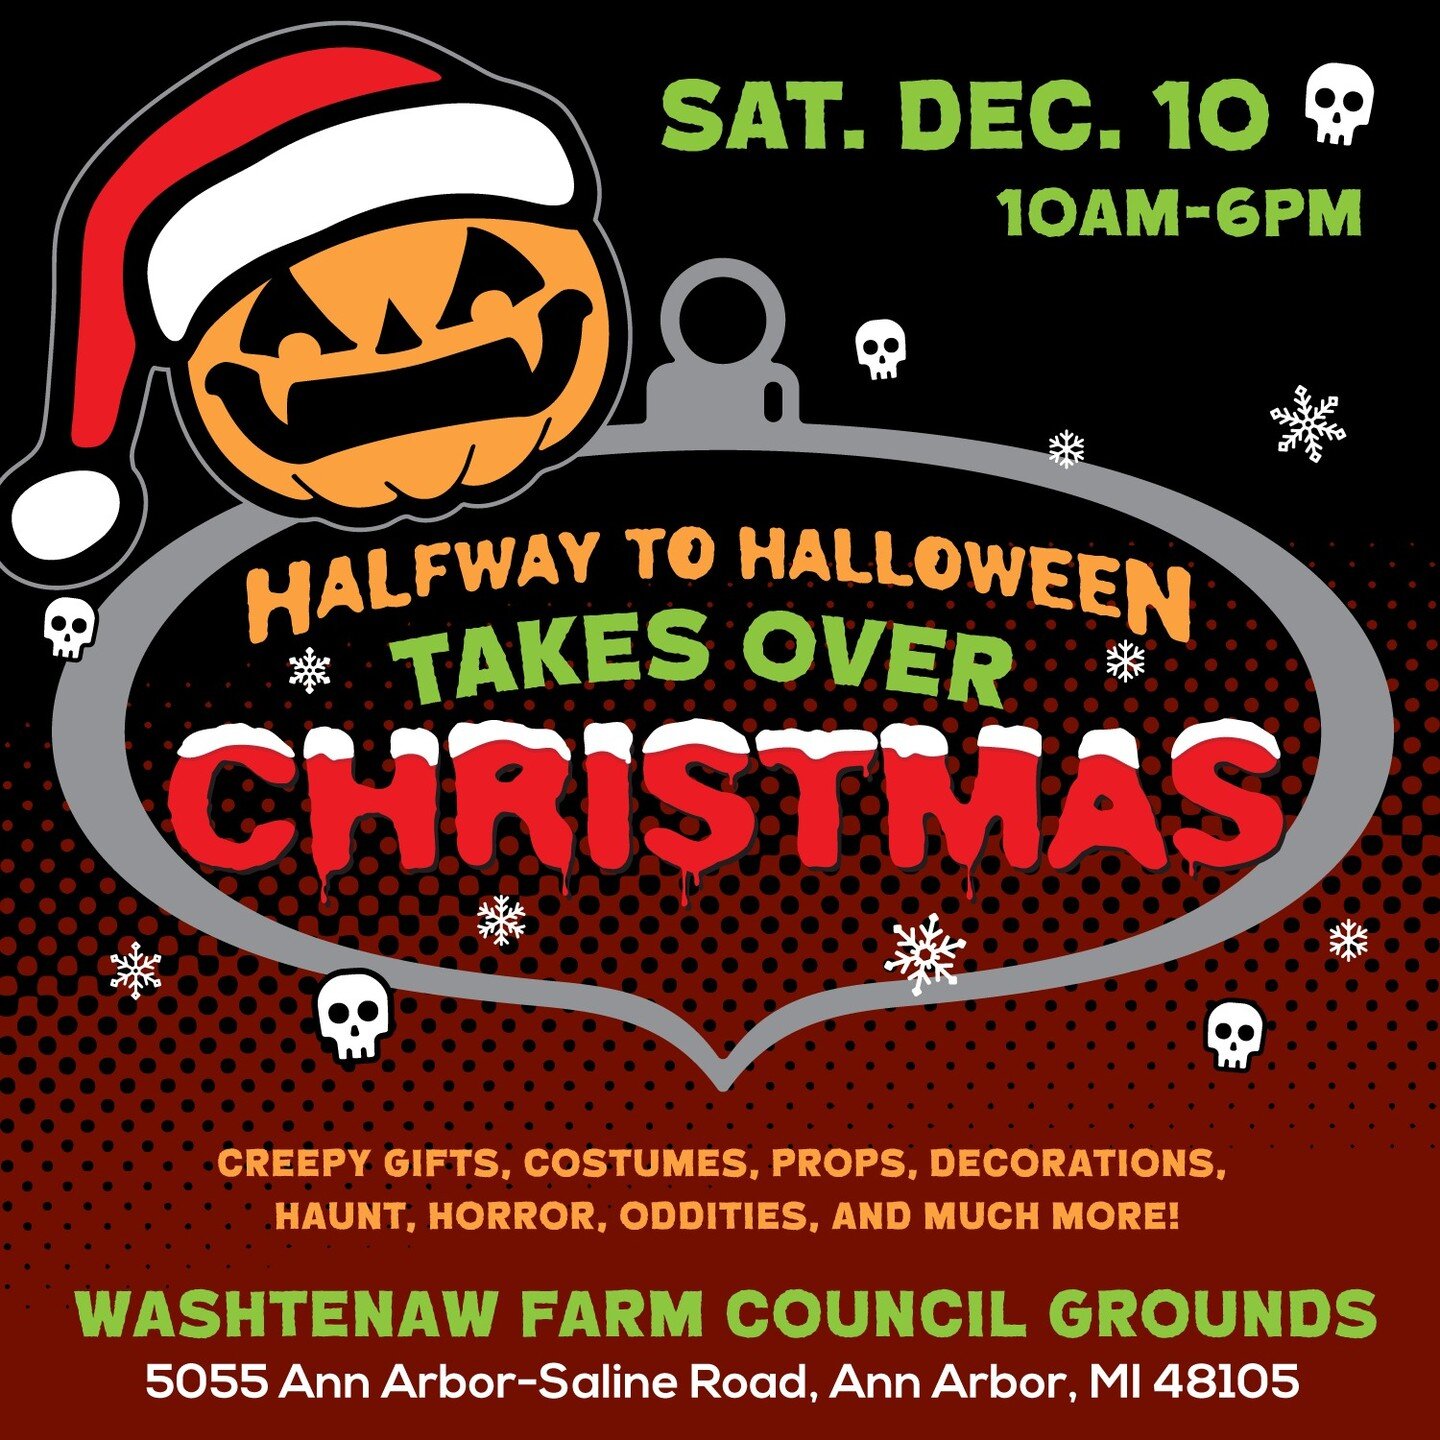 The only Holiday Show we will be doing this season... &quot;Halfway To Halloween Takes Over Christmas&quot; on Saturday December 10th, 10am-6pm. This is an indoor event. Washtenaw Farm Council Grounds - Ann Arbor, MI
.⁣
.⁣
.⁣
.⁣
.⁣
#annarbor #annarbo